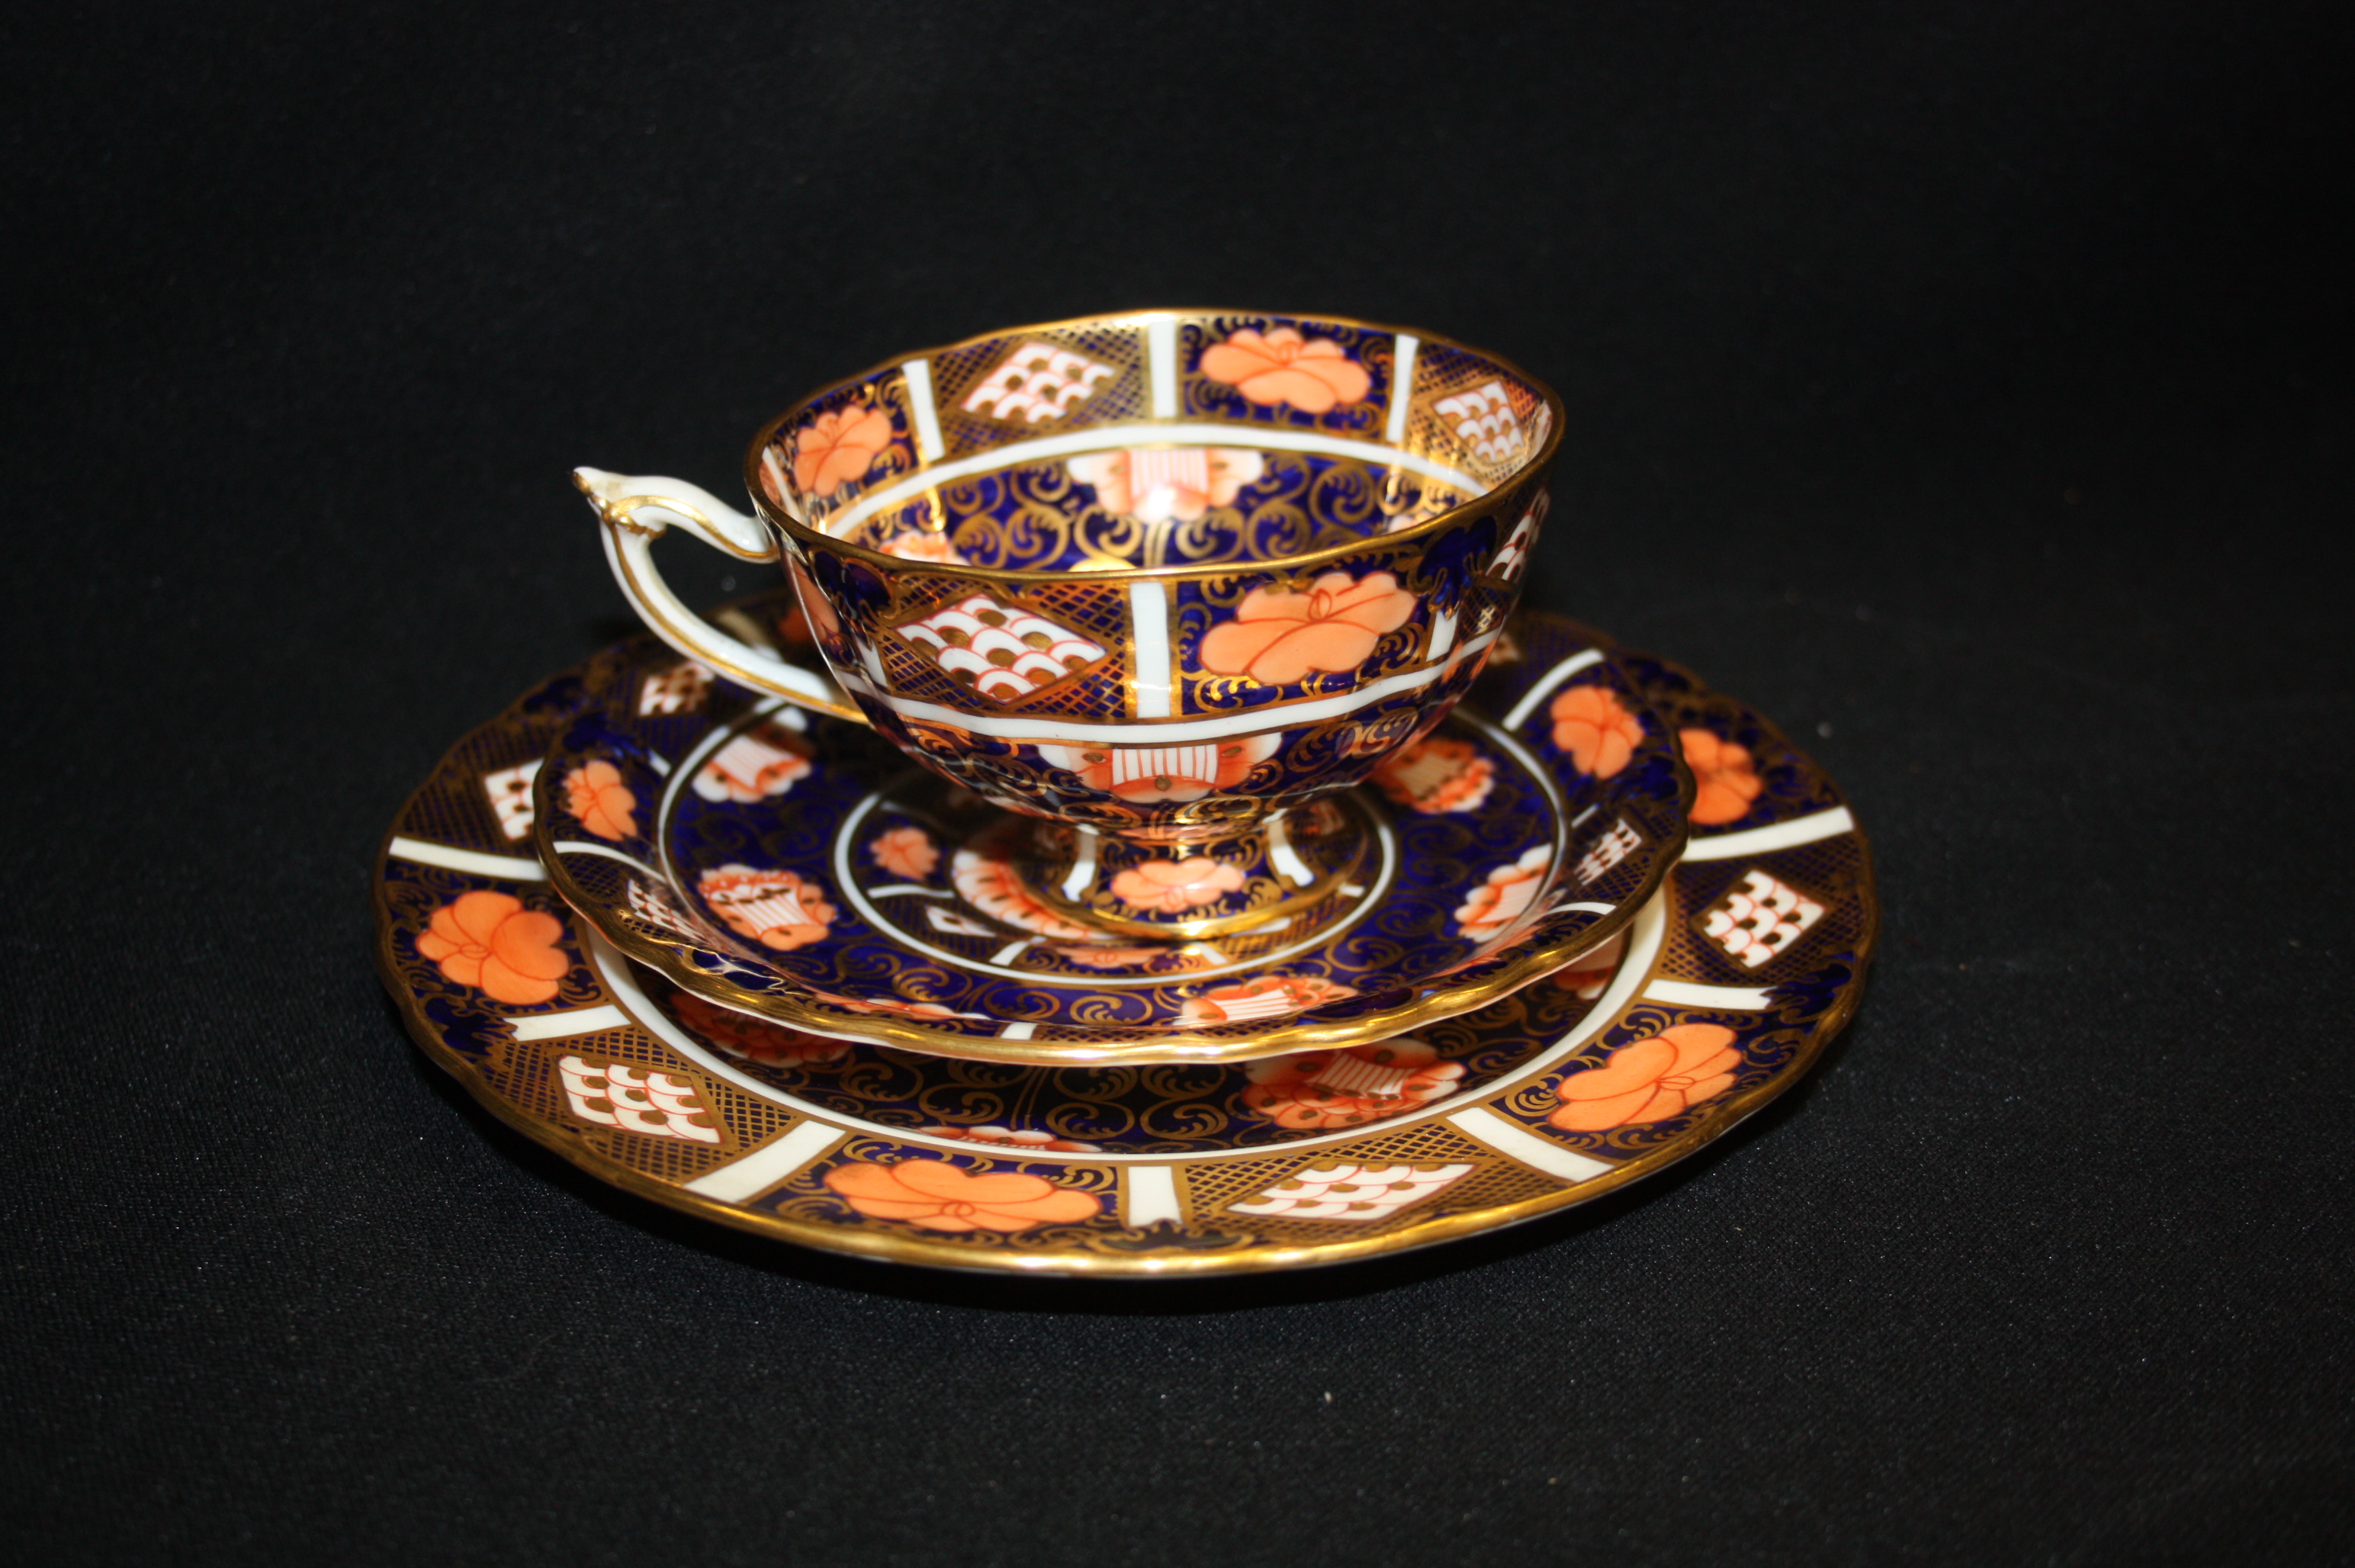 A Royal Crown Derby 9298 pattern Imari cup, saucer and side plate